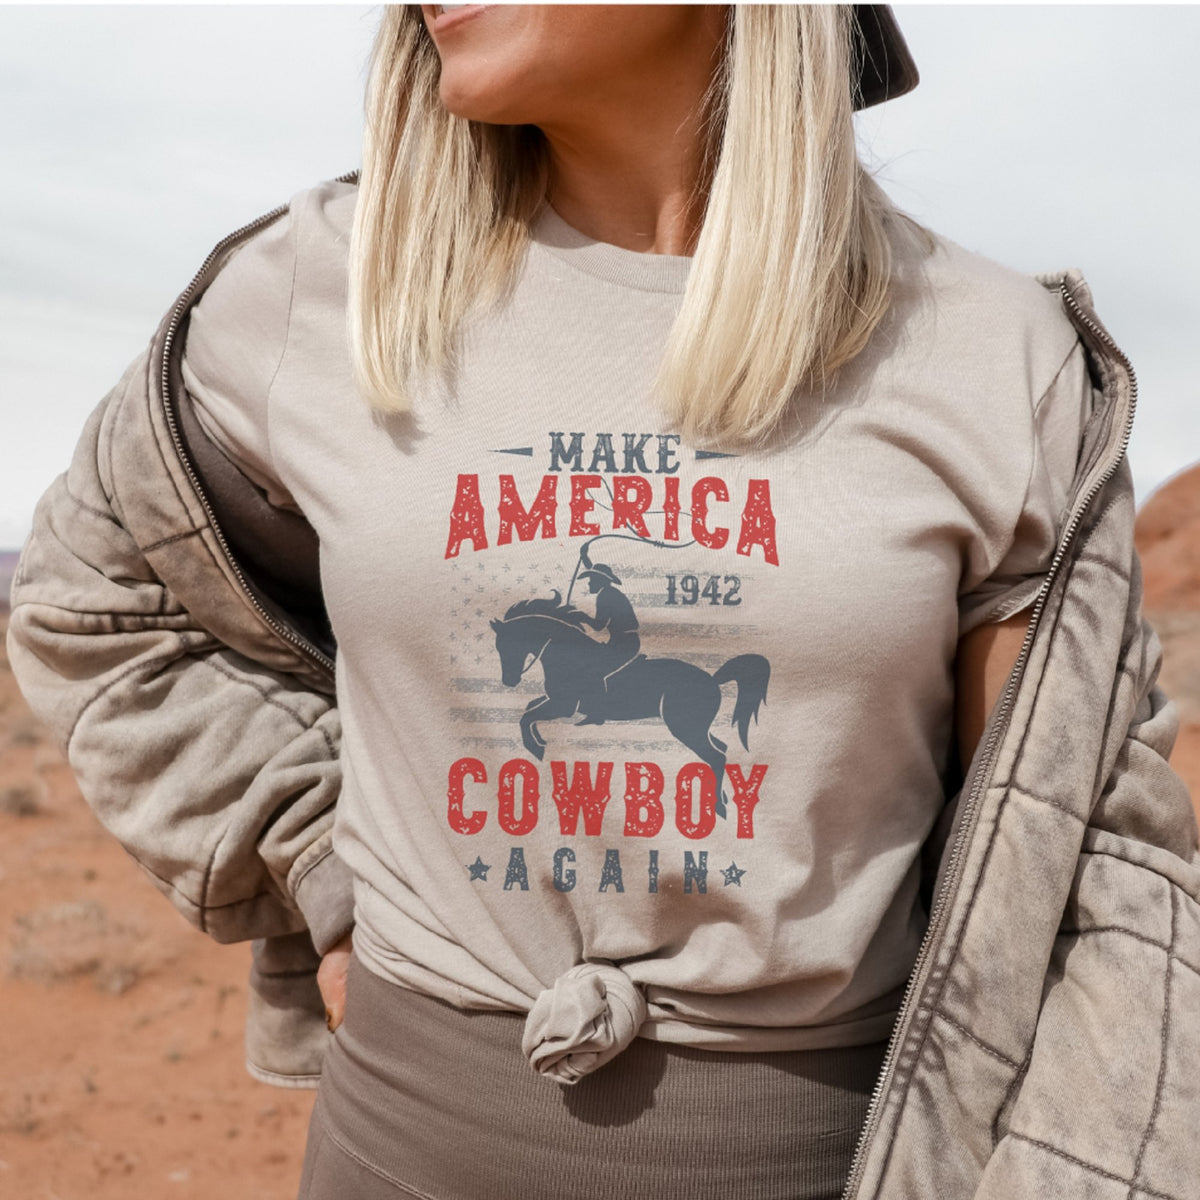 This Country Needs More Cowboys T-Shirt